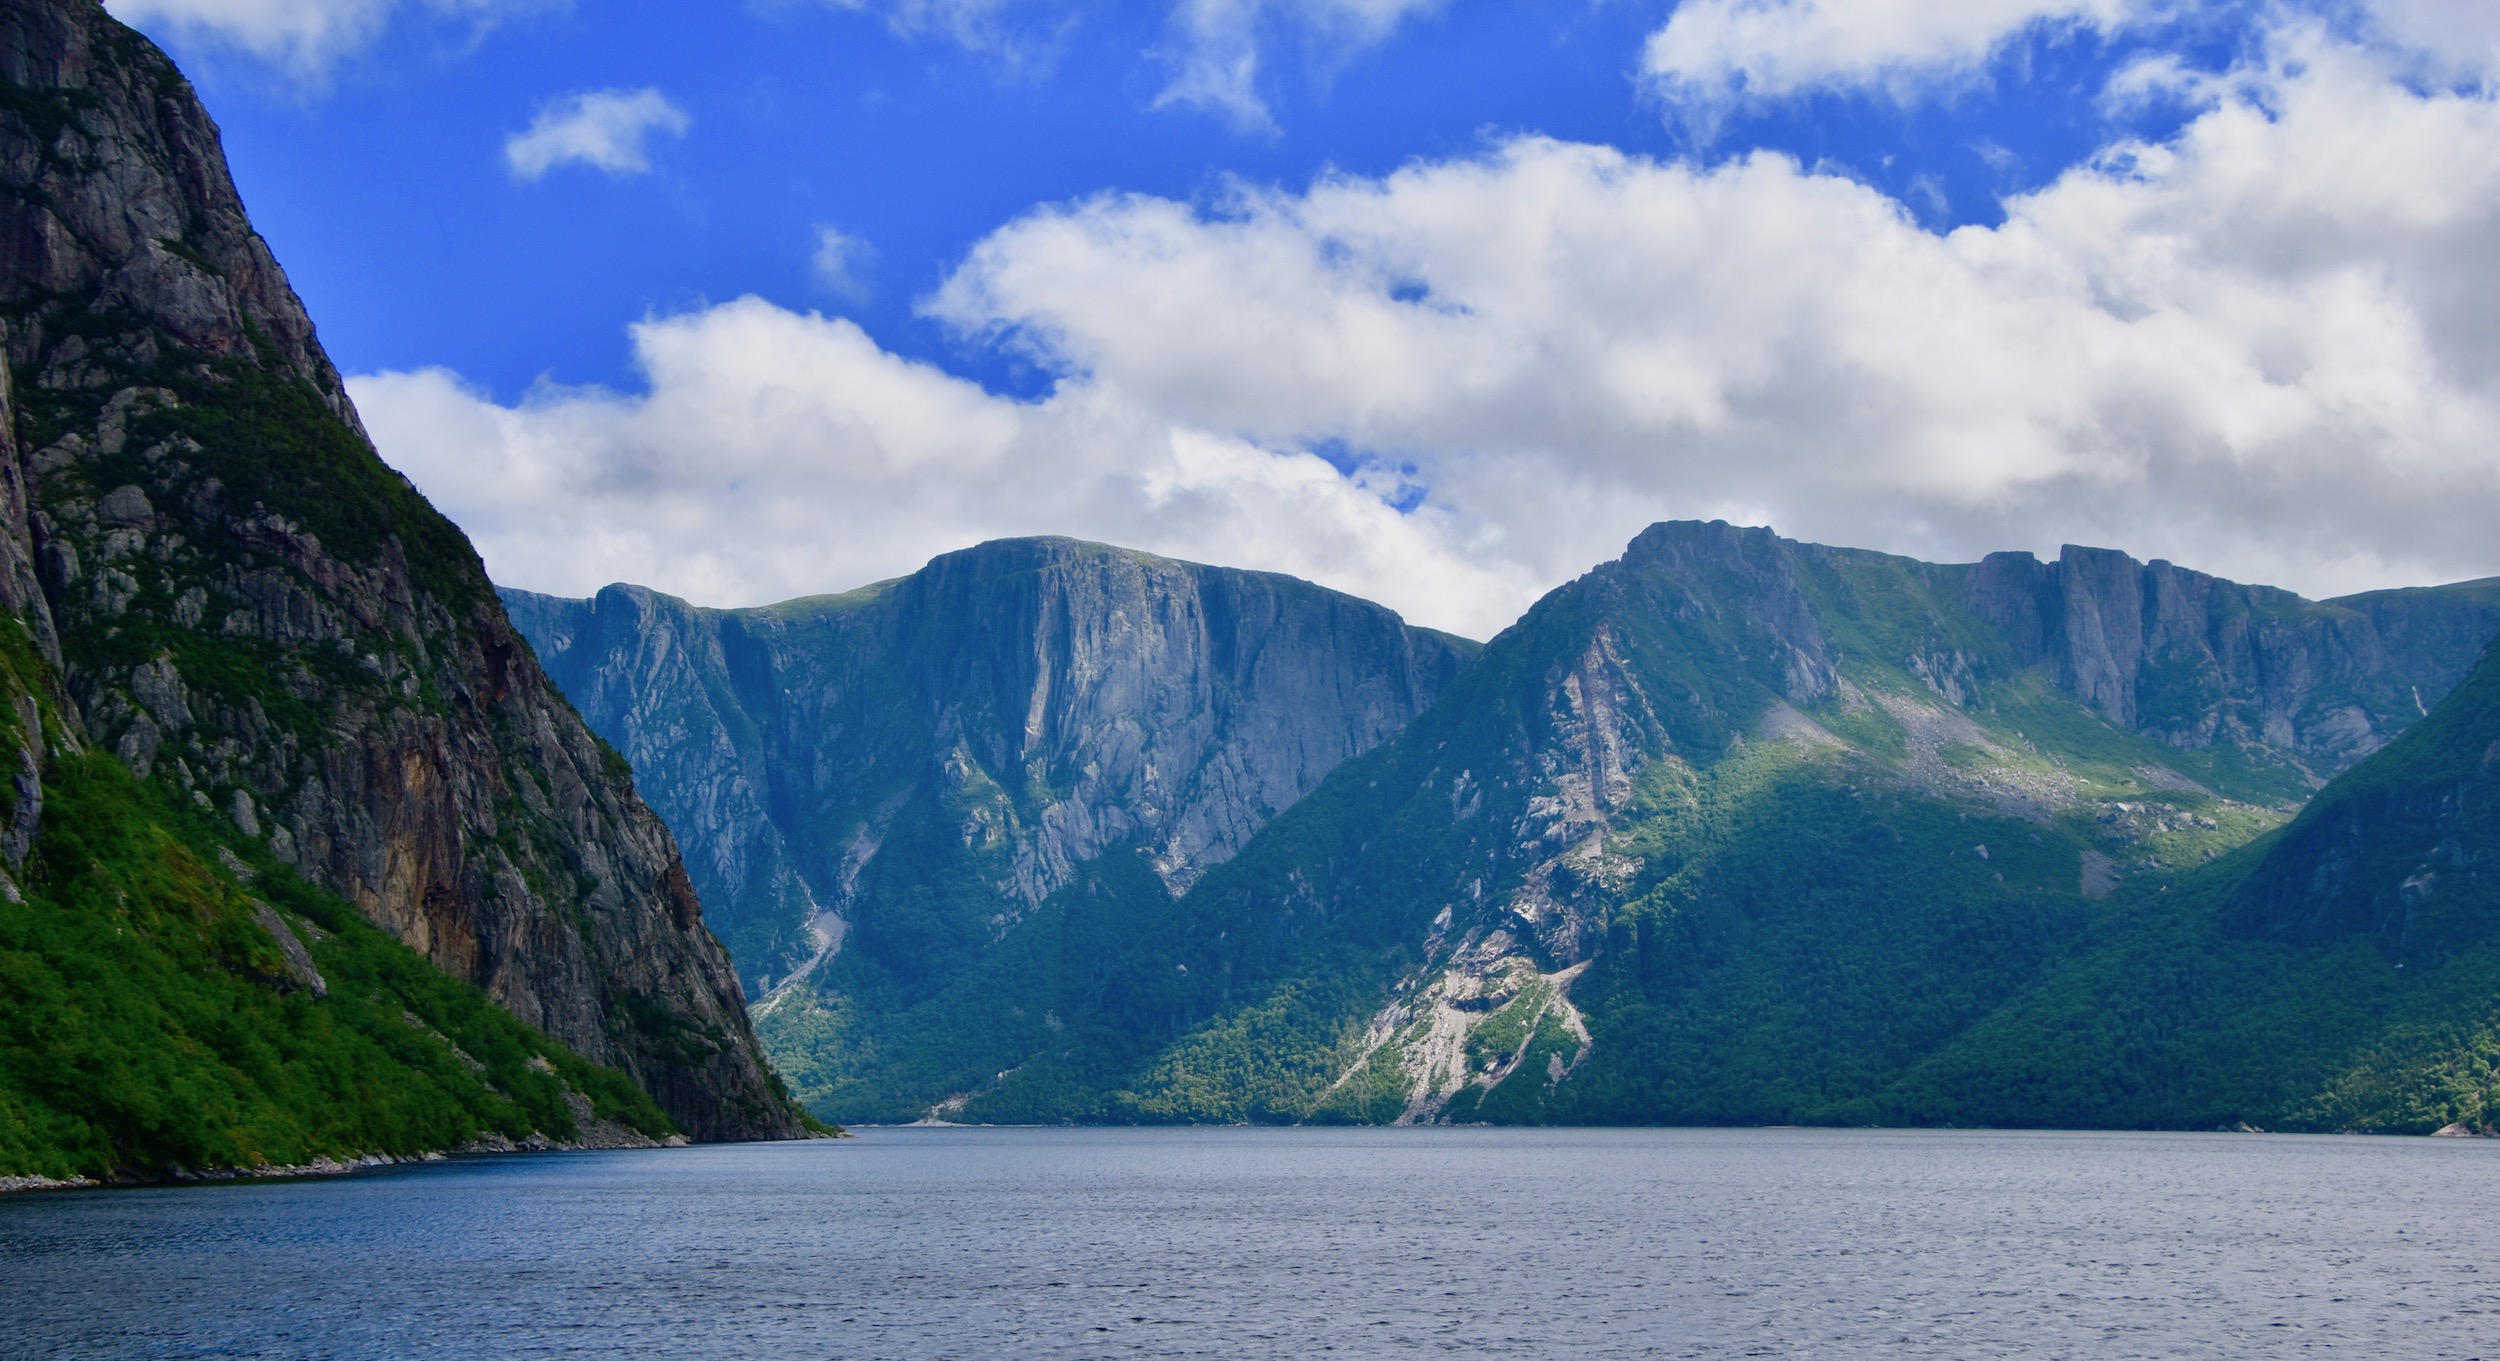 Looking into the Fjord, Western Brook Pond